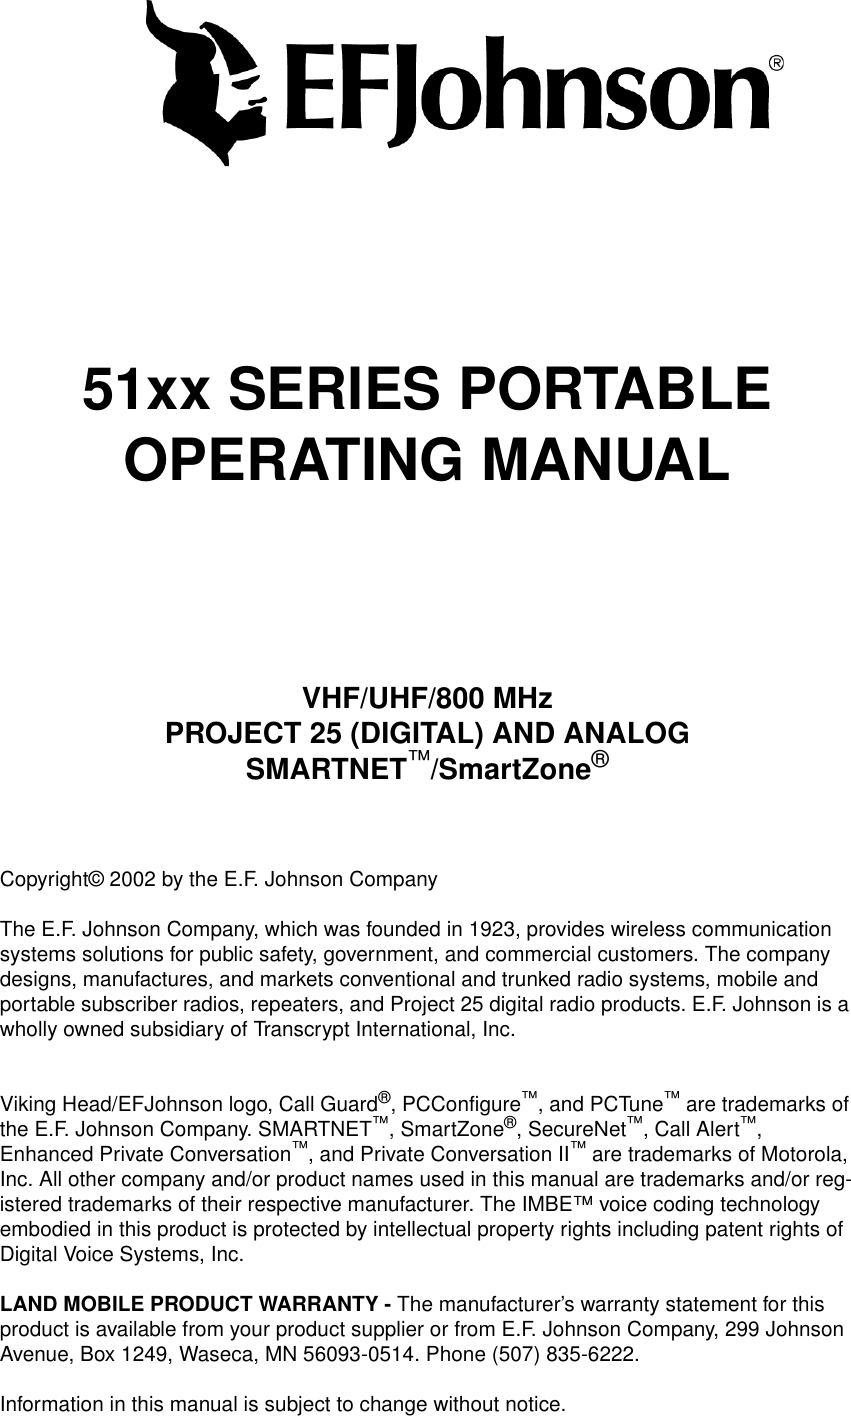 51xx SERIES PORTABLEOPERATING MANUALVHF/UHF/800 MHzPROJECT 25 (DIGITAL) AND ANALOGSMARTNET™/SmartZone®Copyright© 2002 by the E.F. Johnson CompanyThe E.F. Johnson Company, which was founded in 1923, provides wireless communication systems solutions for public safety, government, and commercial customers. The company designs, manufactures, and markets conventional and trunked radio systems, mobile and portable subscriber radios, repeaters, and Project 25 digital radio products. E.F. Johnson is a wholly owned subsidiary of Transcrypt International, Inc.Viking Head/EFJohnson logo, Call Guard®, PCConfigure™, and PCTune™ are trademarks of the E.F. Johnson Company. SMARTNET™, SmartZone®, SecureNet™, Call Alert™, Enhanced Private Conversation™, and Private Conversation II™ are trademarks of Motorola, Inc. All other company and/or product names used in this manual are trademarks and/or reg-istered trademarks of their respective manufacturer. The IMBE™ voice coding technology embodied in this product is protected by intellectual property rights including patent rights of Digital Voice Systems, Inc.LAND MOBILE PRODUCT WARRANTY - The manufacturer’s warranty statement for this product is available from your product supplier or from E.F. Johnson Company, 299 Johnson Avenue, Box 1249, Waseca, MN 56093-0514. Phone (507) 835-6222.Information in this manual is subject to change without notice. 